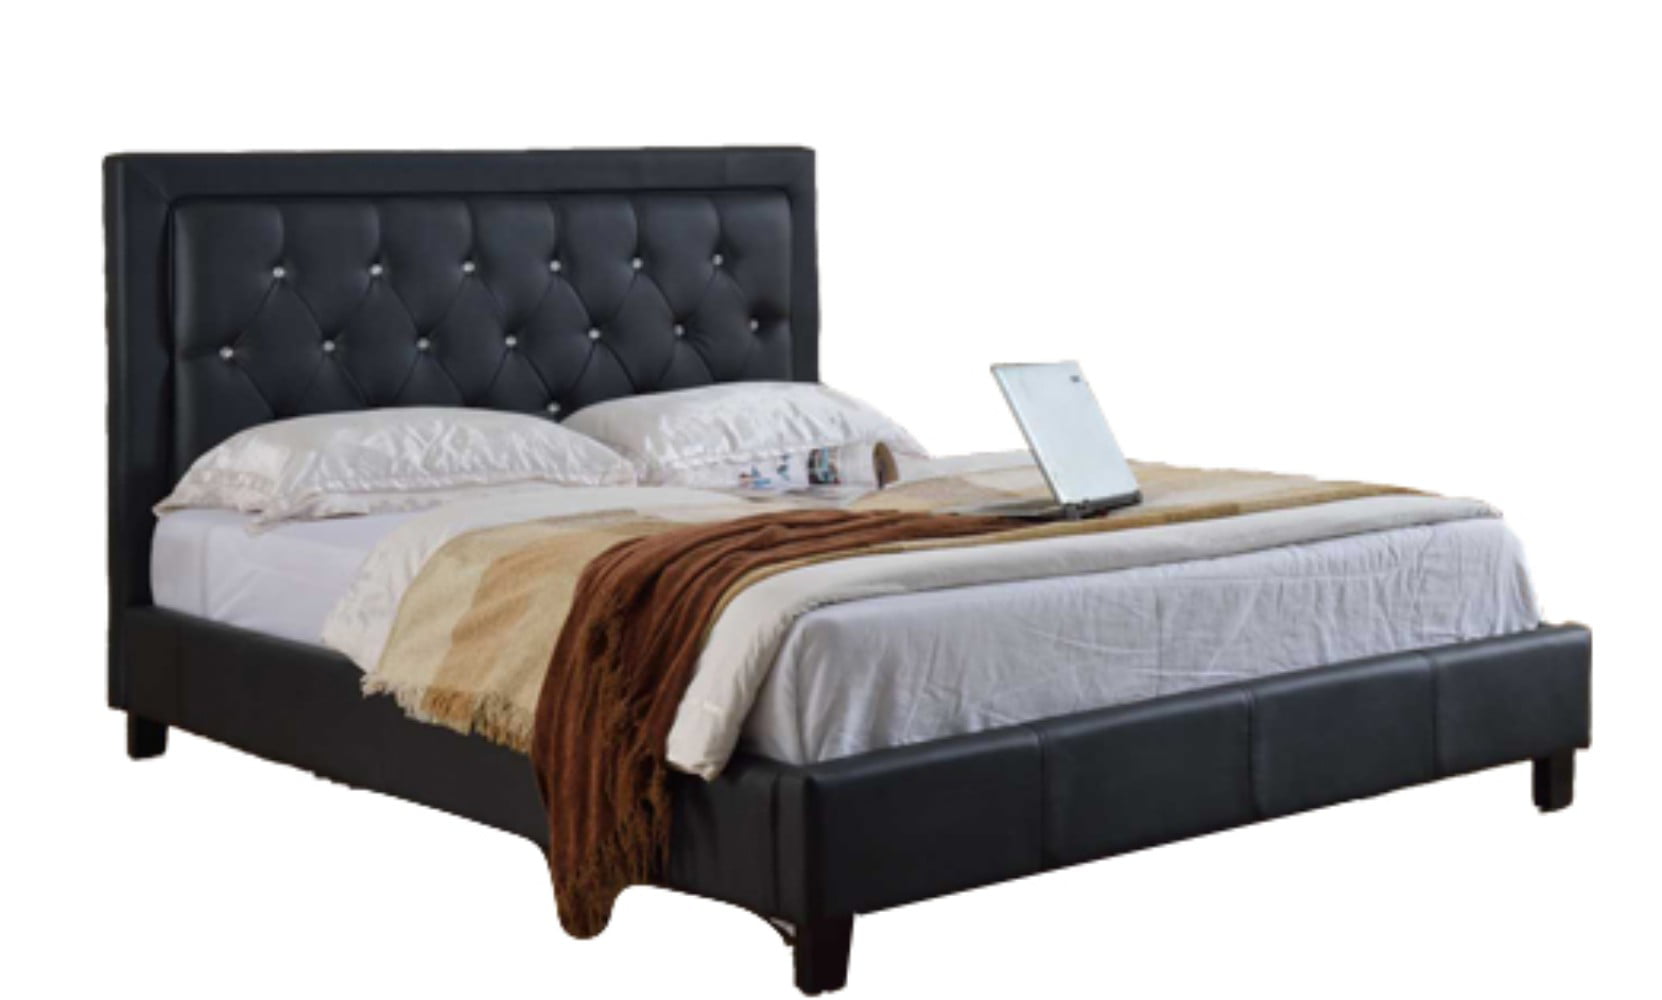 California King Size Platform Bed With, Black California King Platform Bed